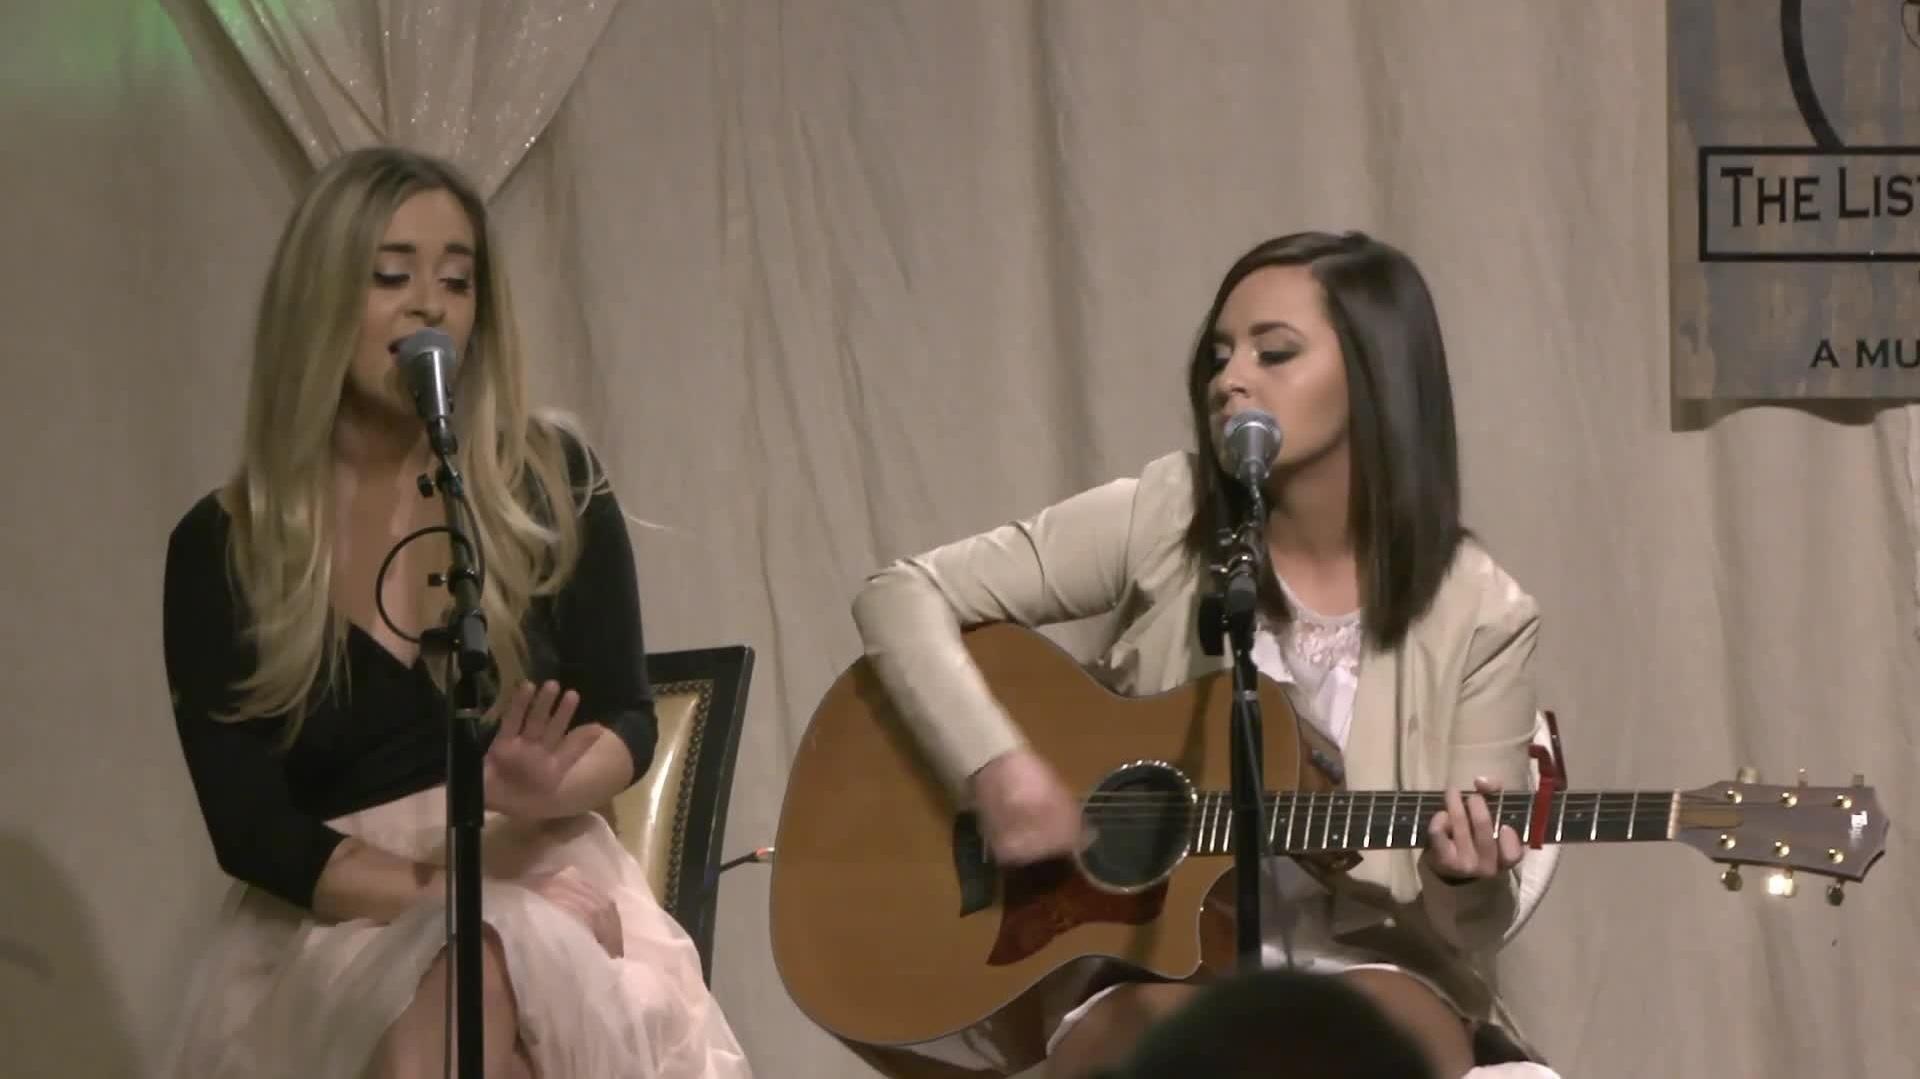 Megan & Liz - That Ghost (Live from Song Suffragettes)